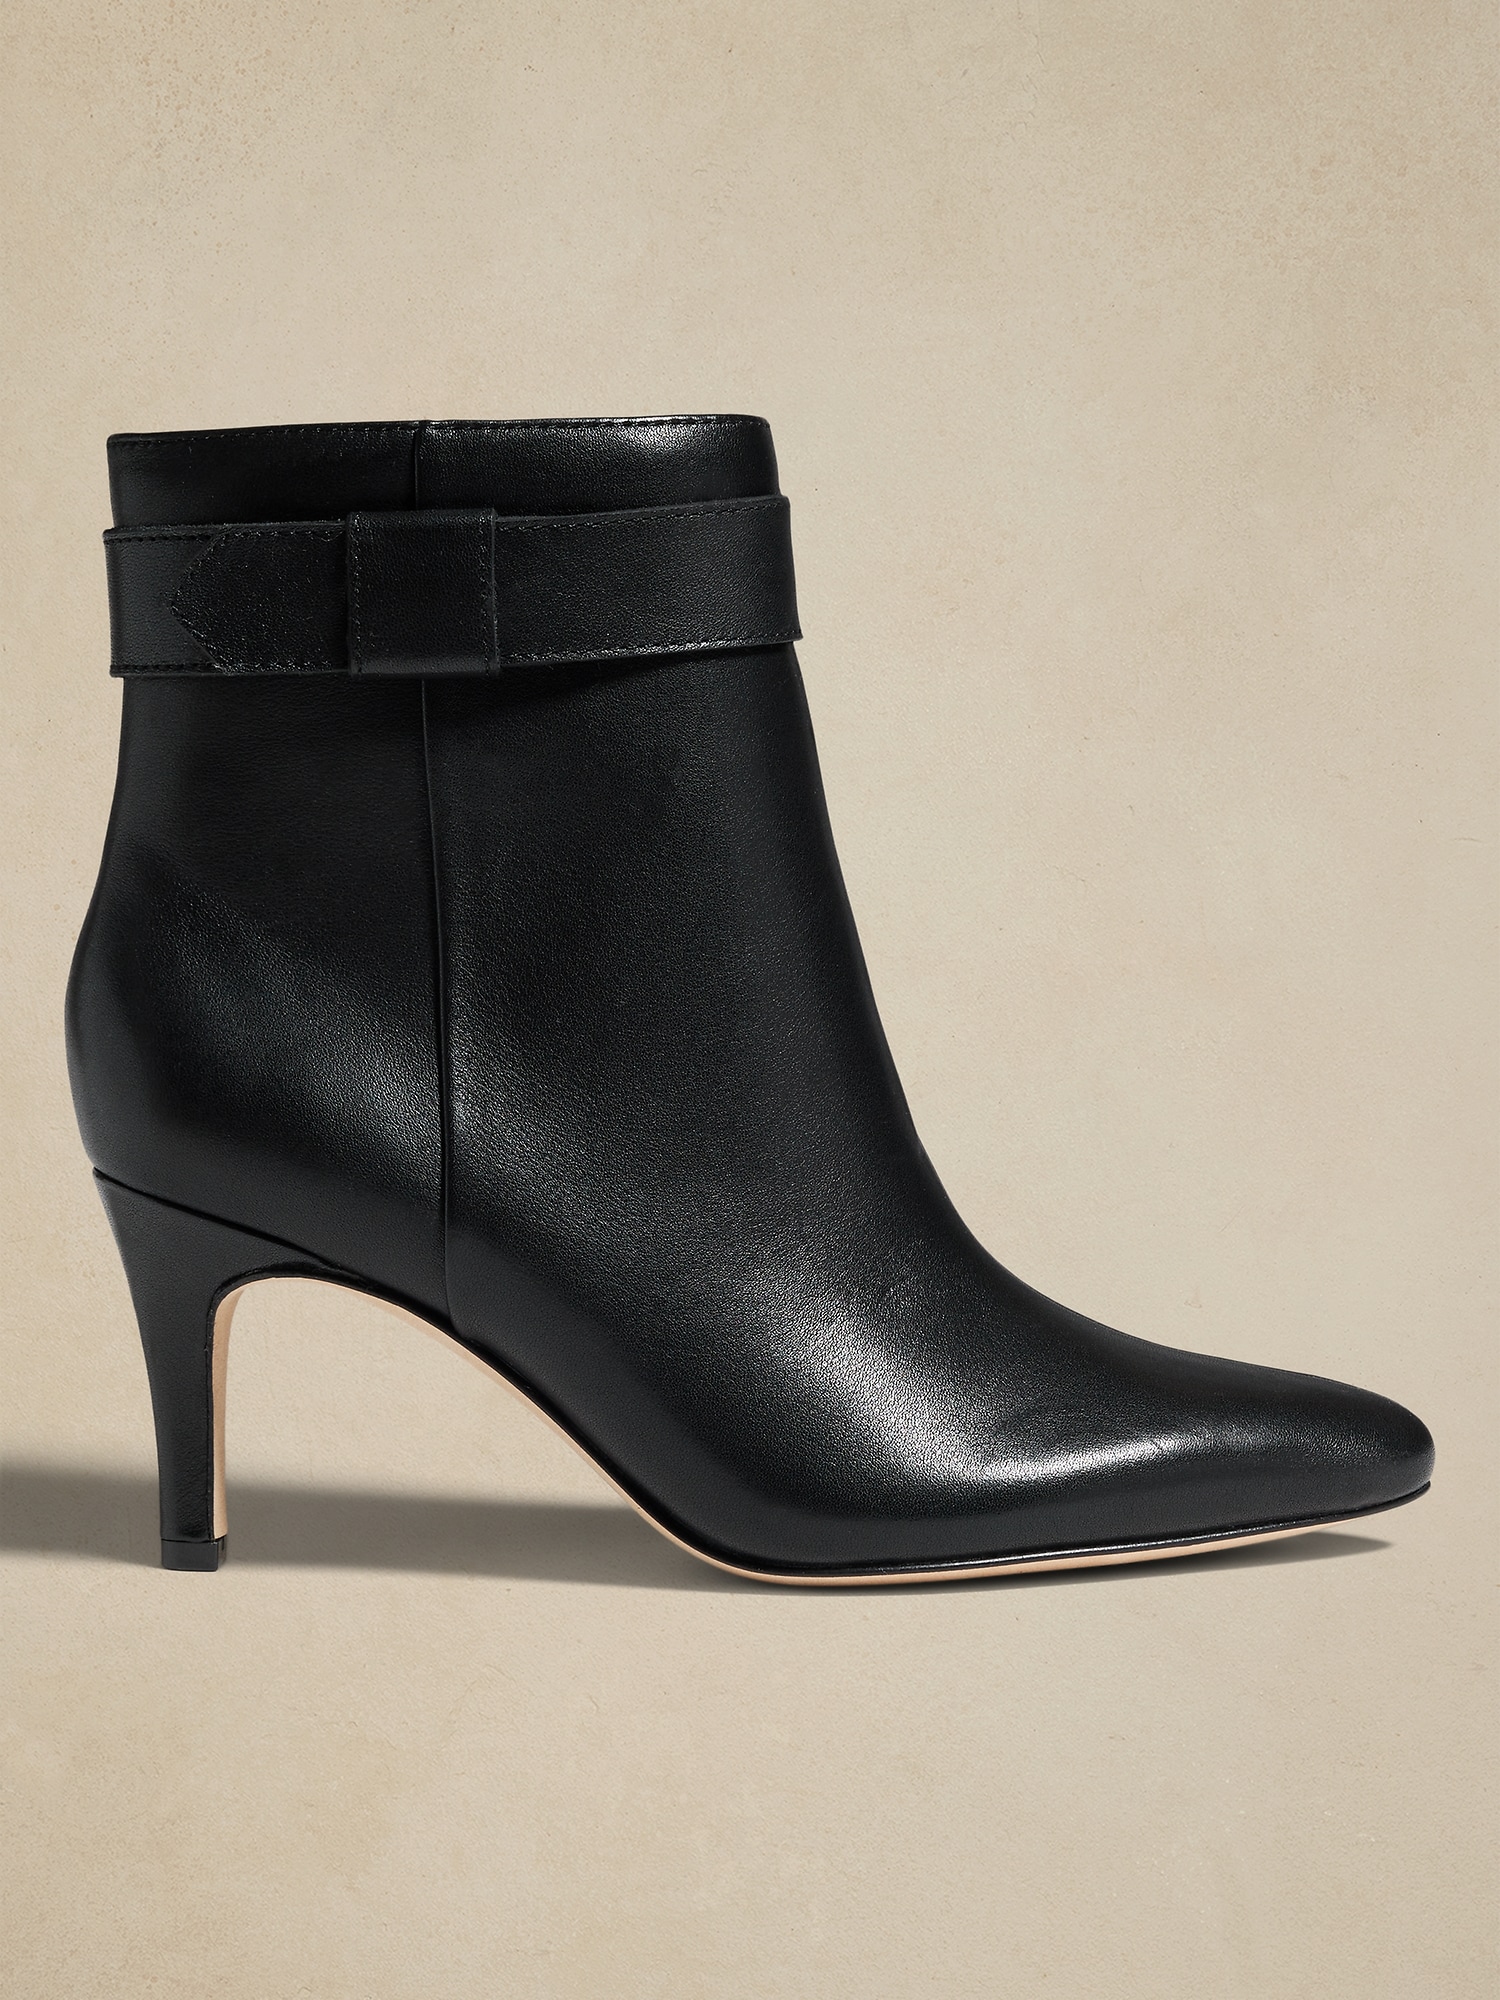 Leather Dress Bootie | Banana Republic Factory